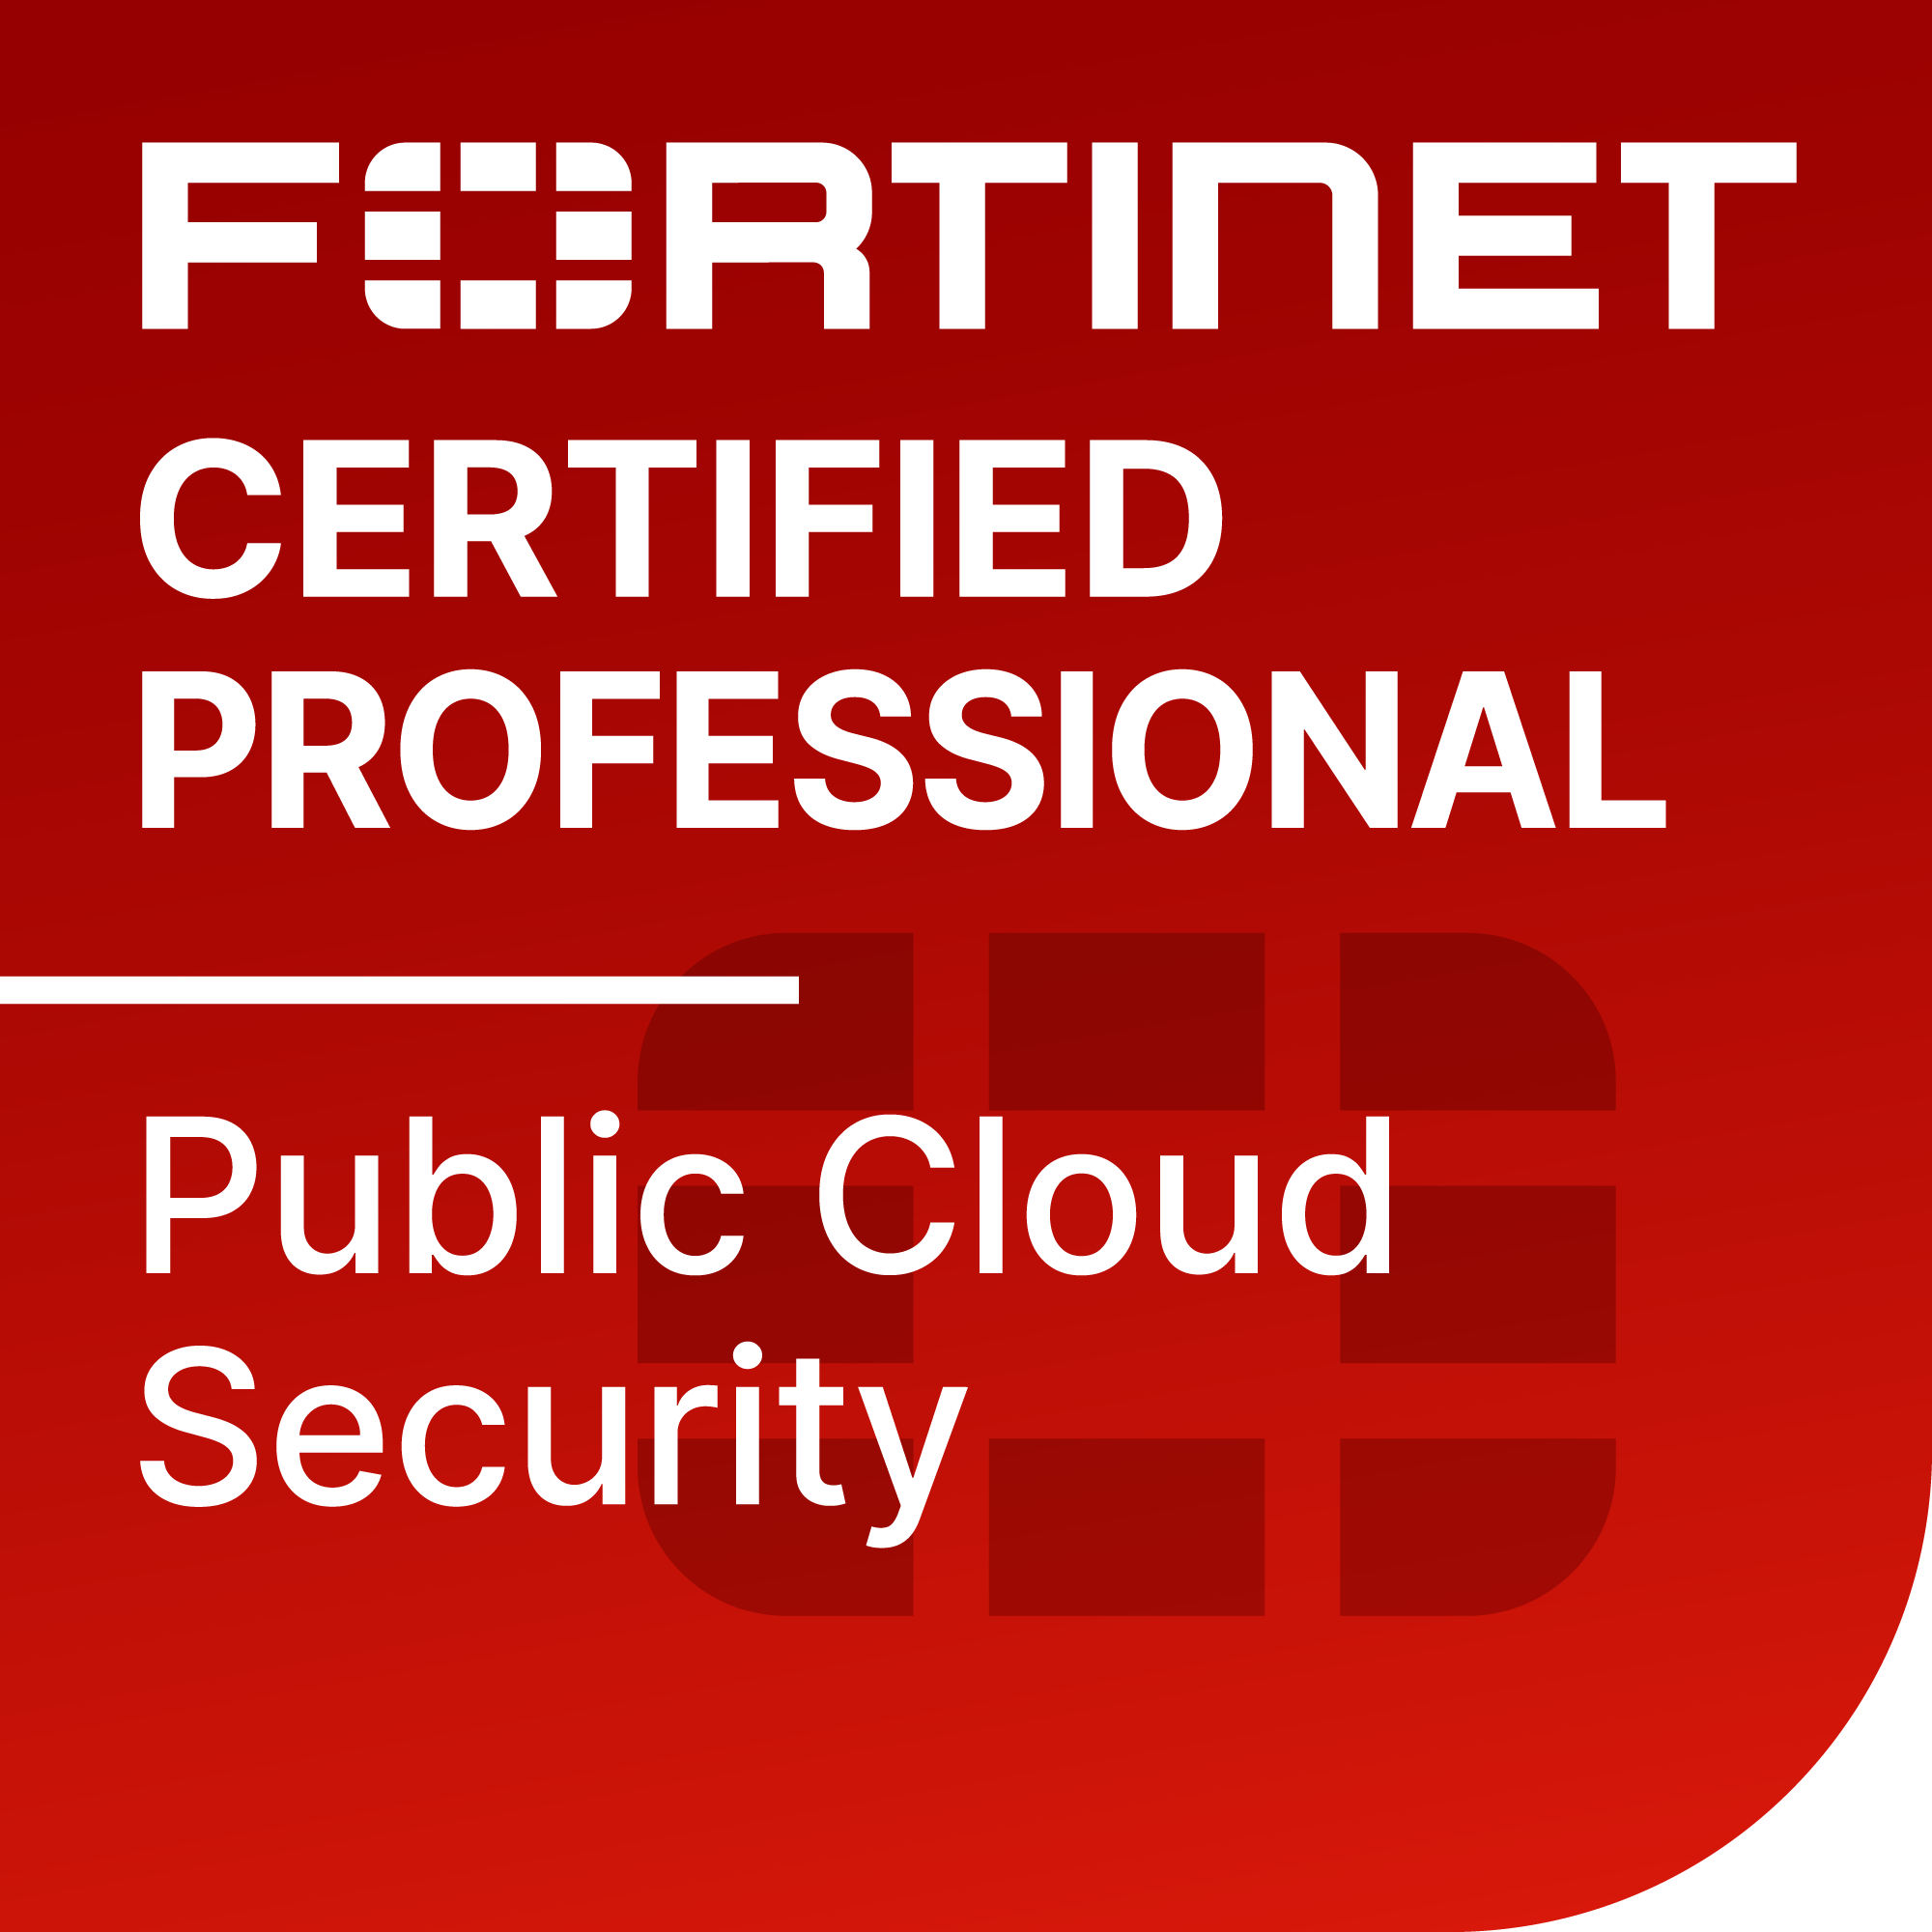 Fortinet Certified Professional in Public Cloud Security Certification